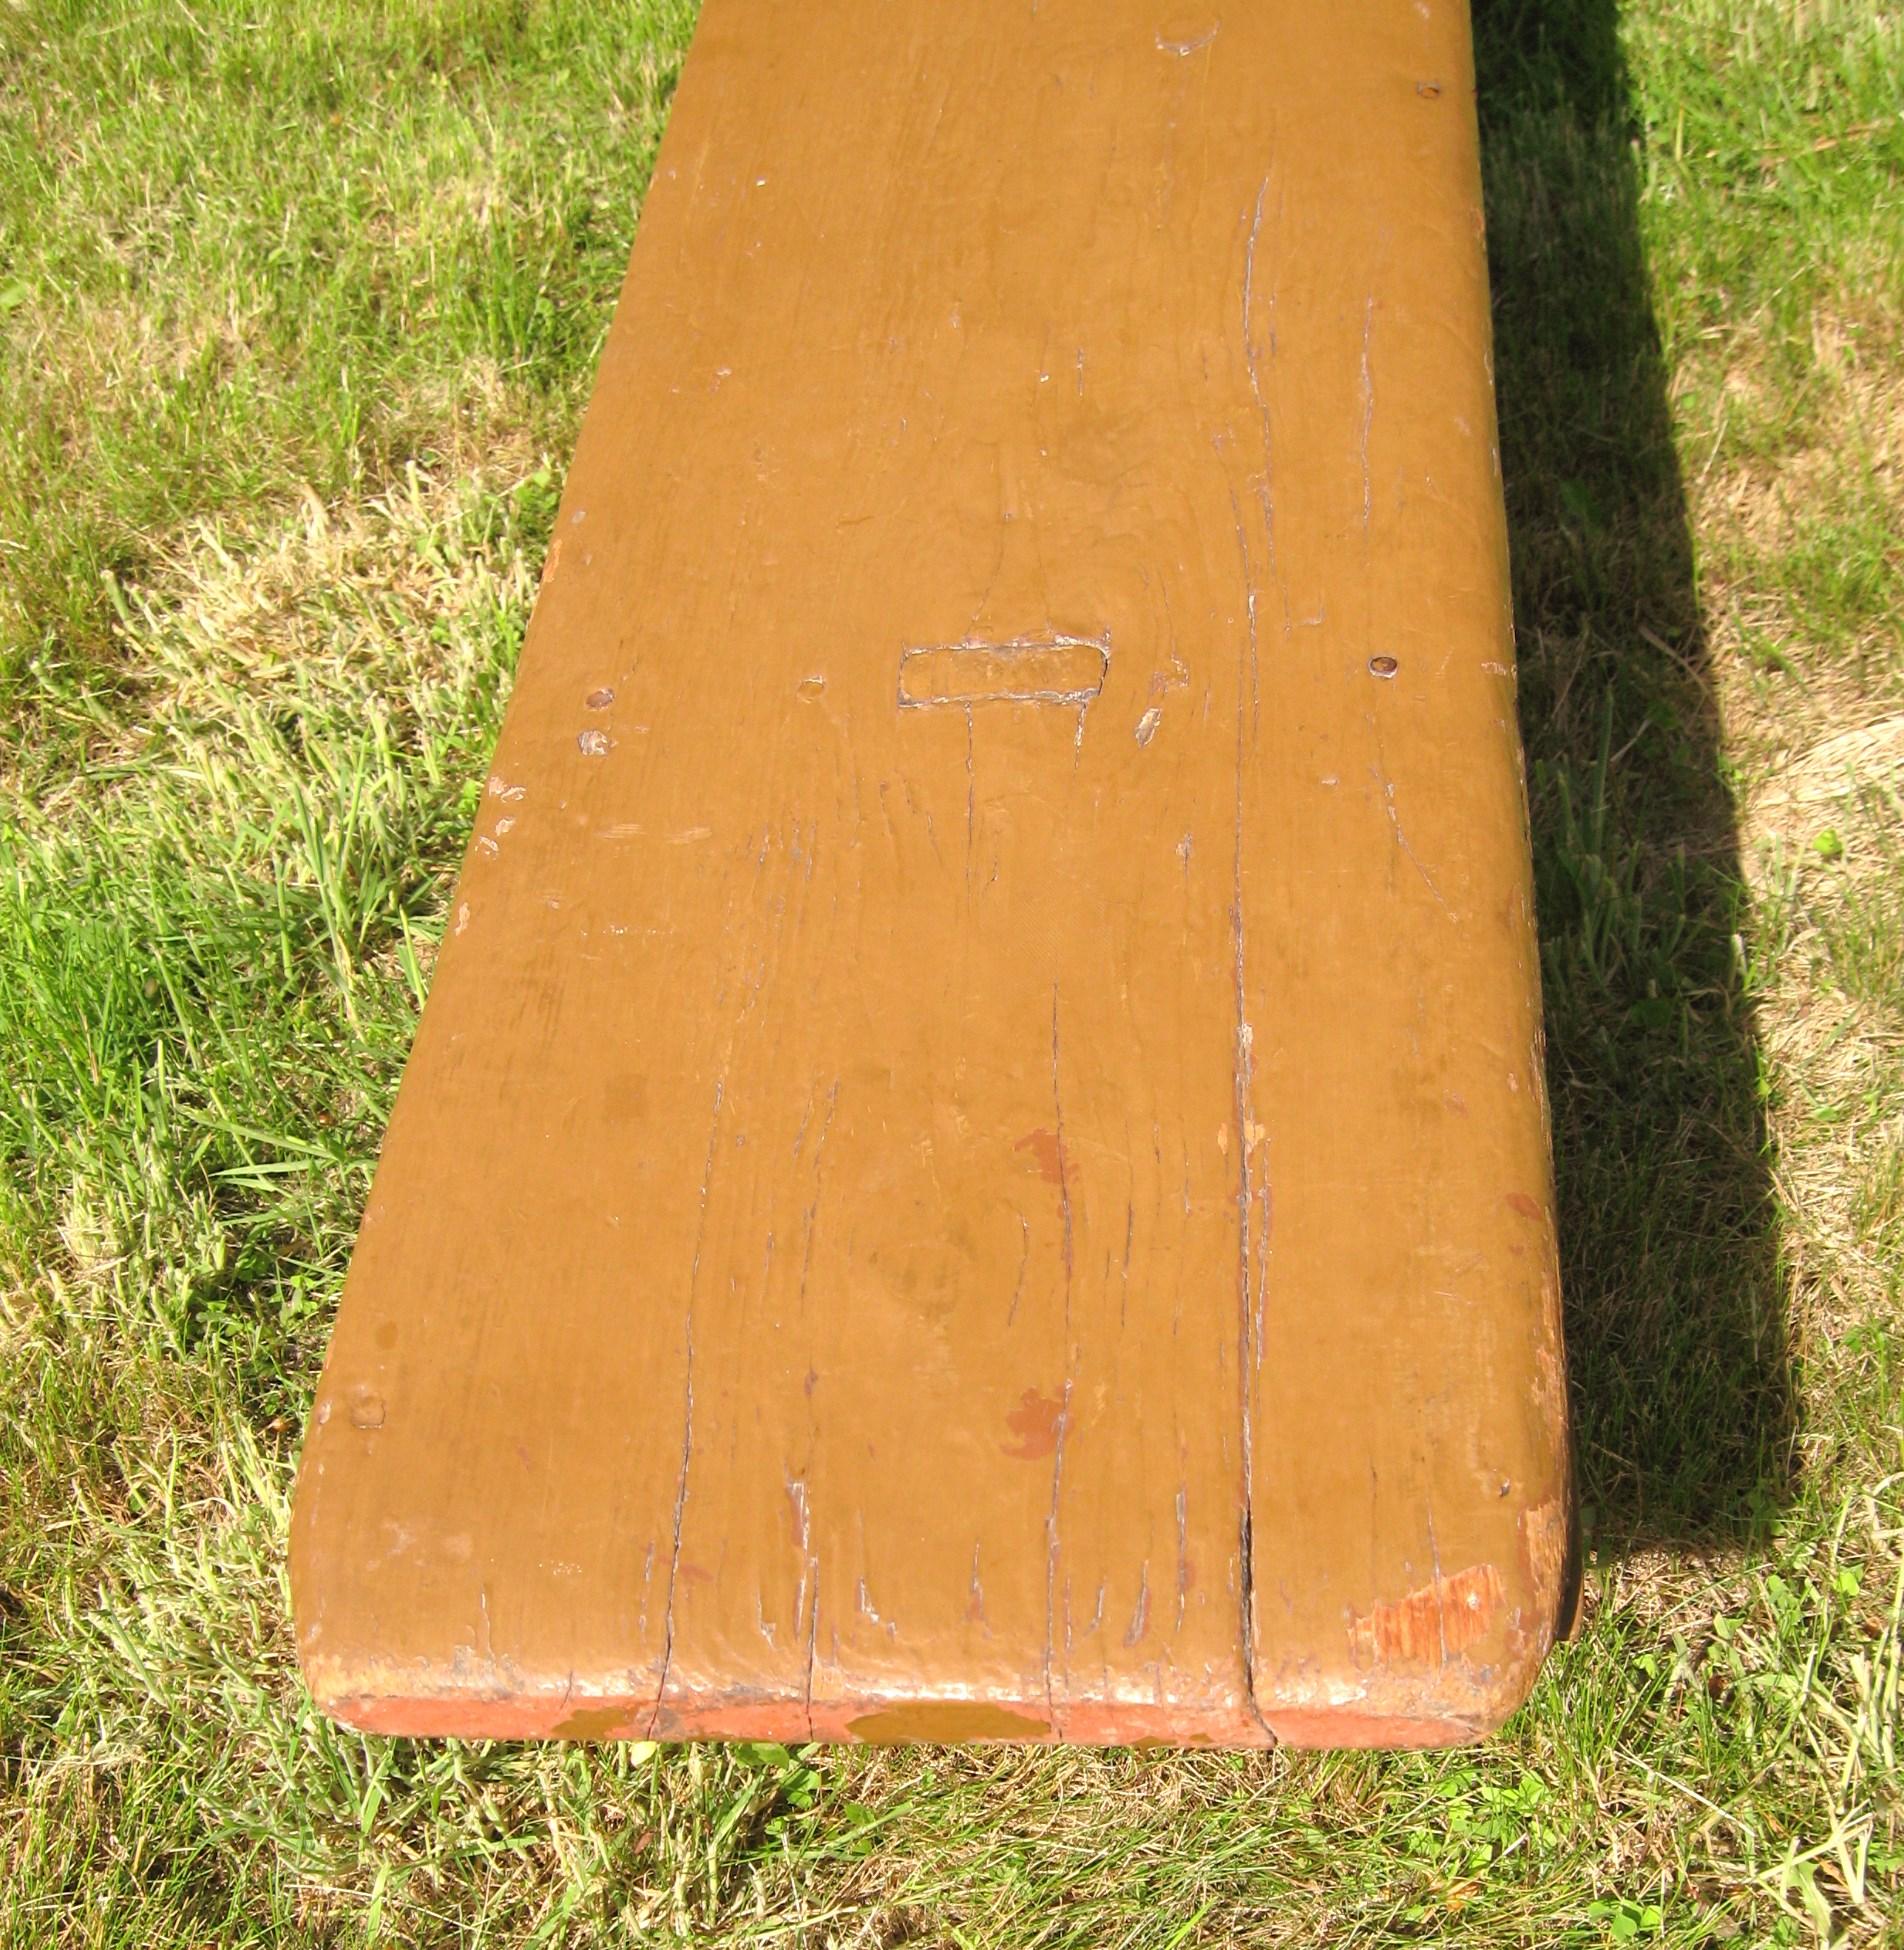 This is a wonderful 1920s pine bench, it has been painted a wonderful Golden putty color over its original red wash. It is mortised and it shows a lot of regional wear. It has wonderful boot jack feet. Another wonderful piece that came out of my